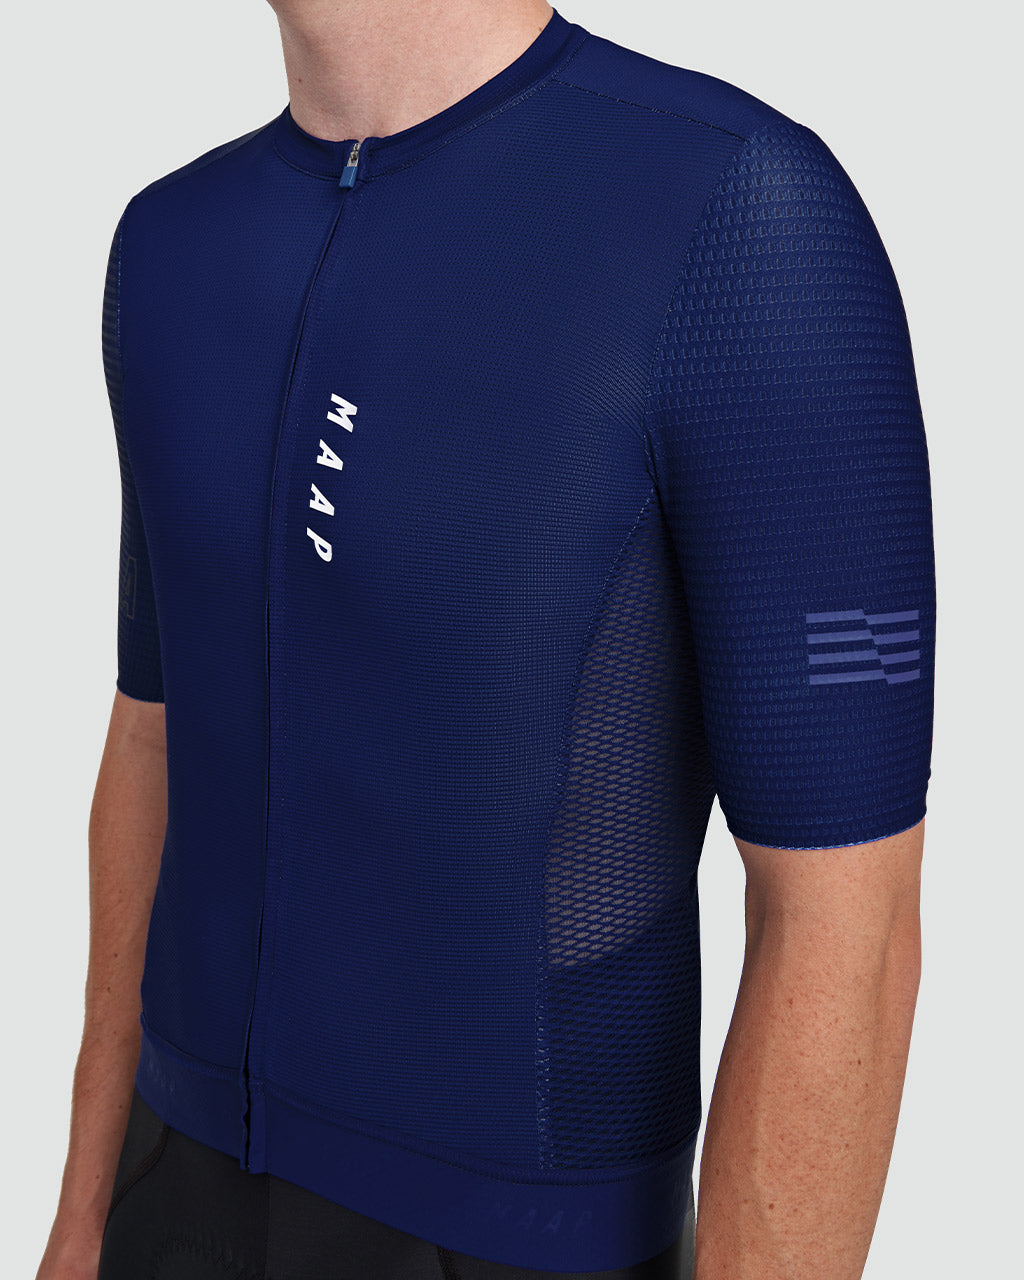 Stealth Race Fit Jersey Ink